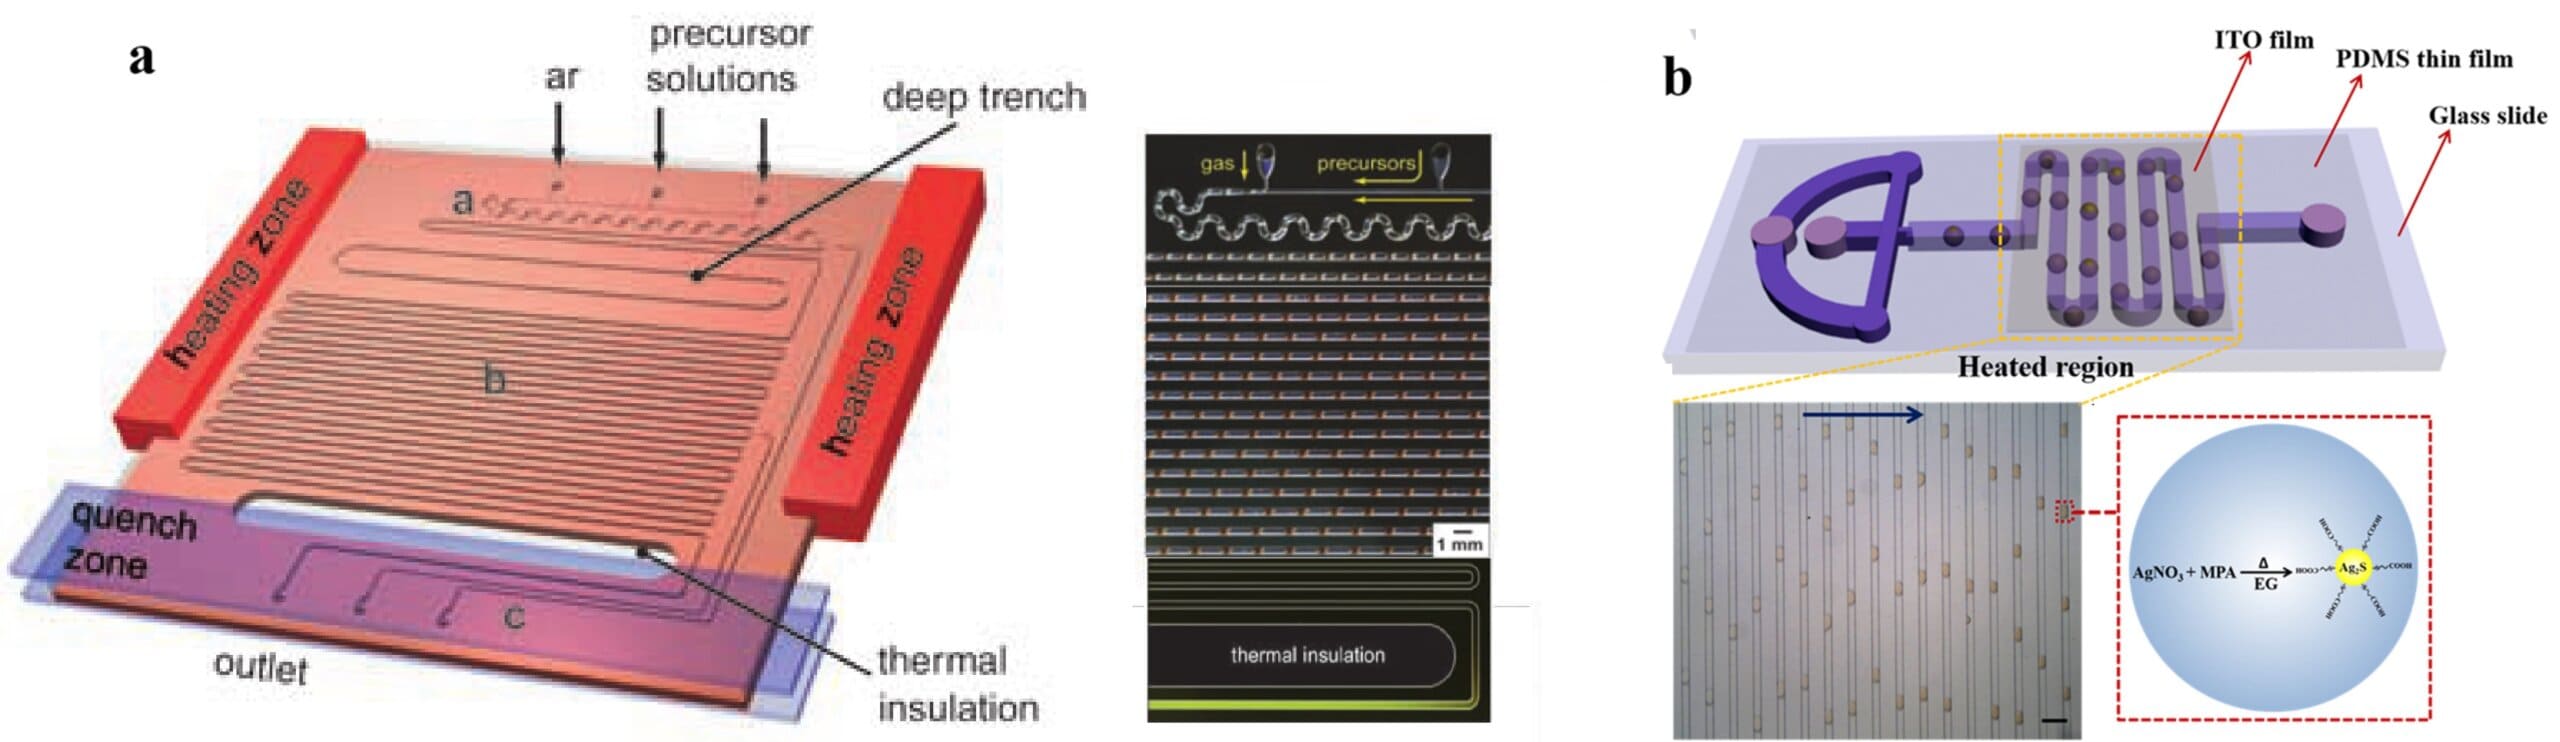 Chemical synthesis microfluidic devices for np scaled